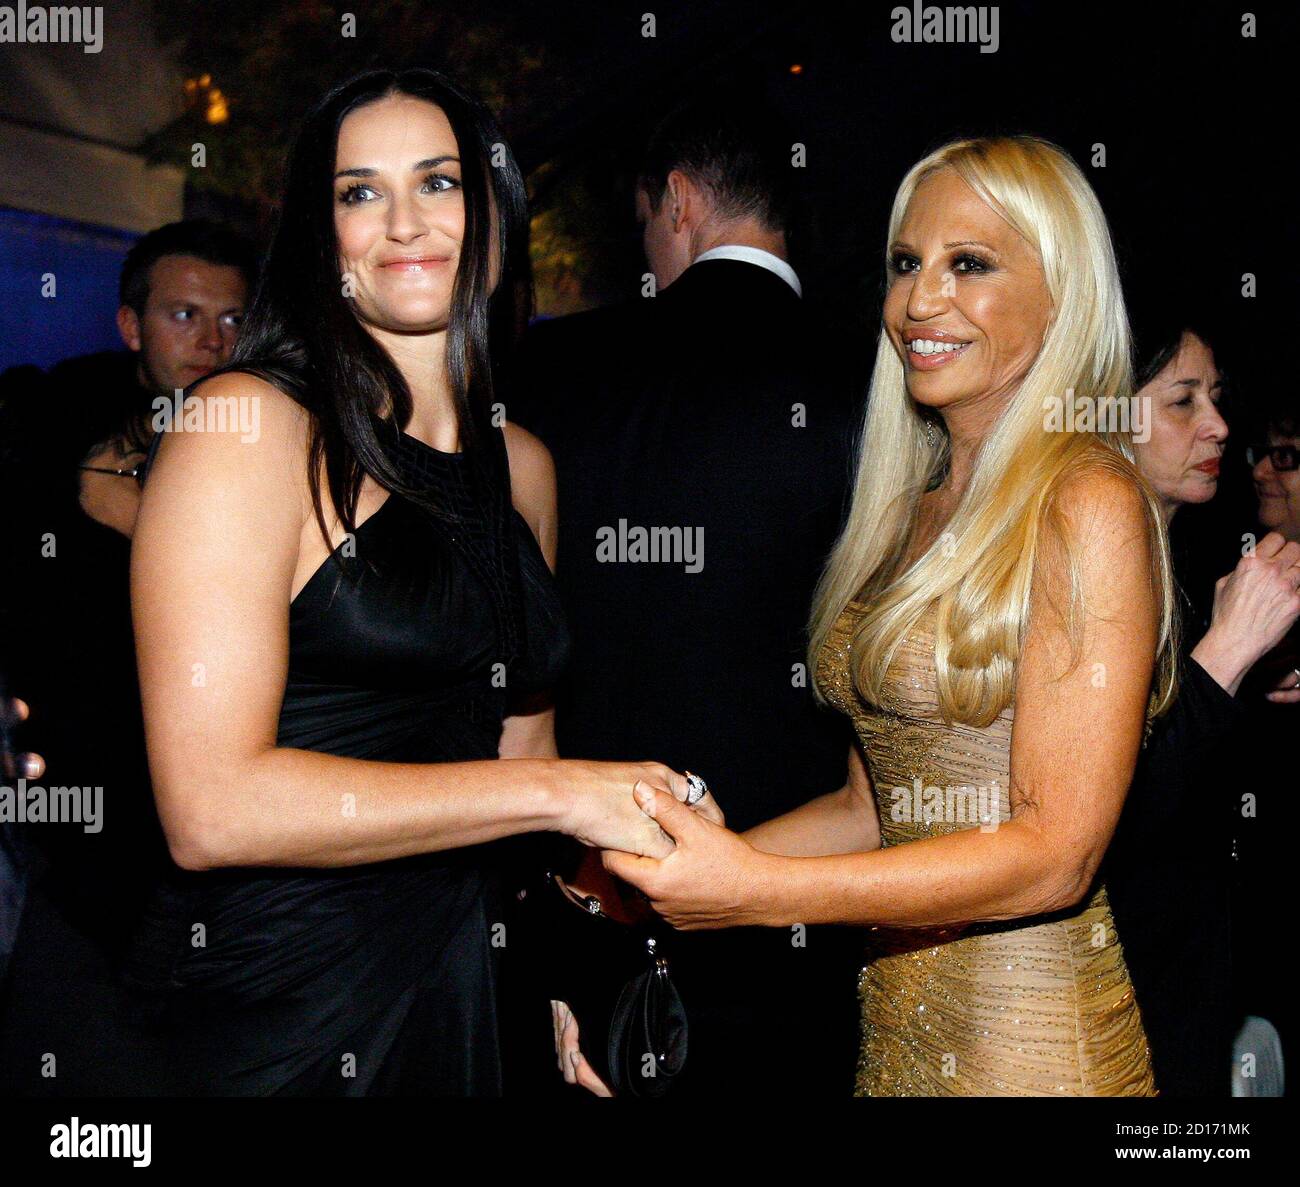 Donatella Versace (R) greets actress Demi Moore at the Rodeo Drive Walk of  Style Award event honoring Italian fashion designers Donatella Versace and  her late brother Gianni, in Beverly Hills California February